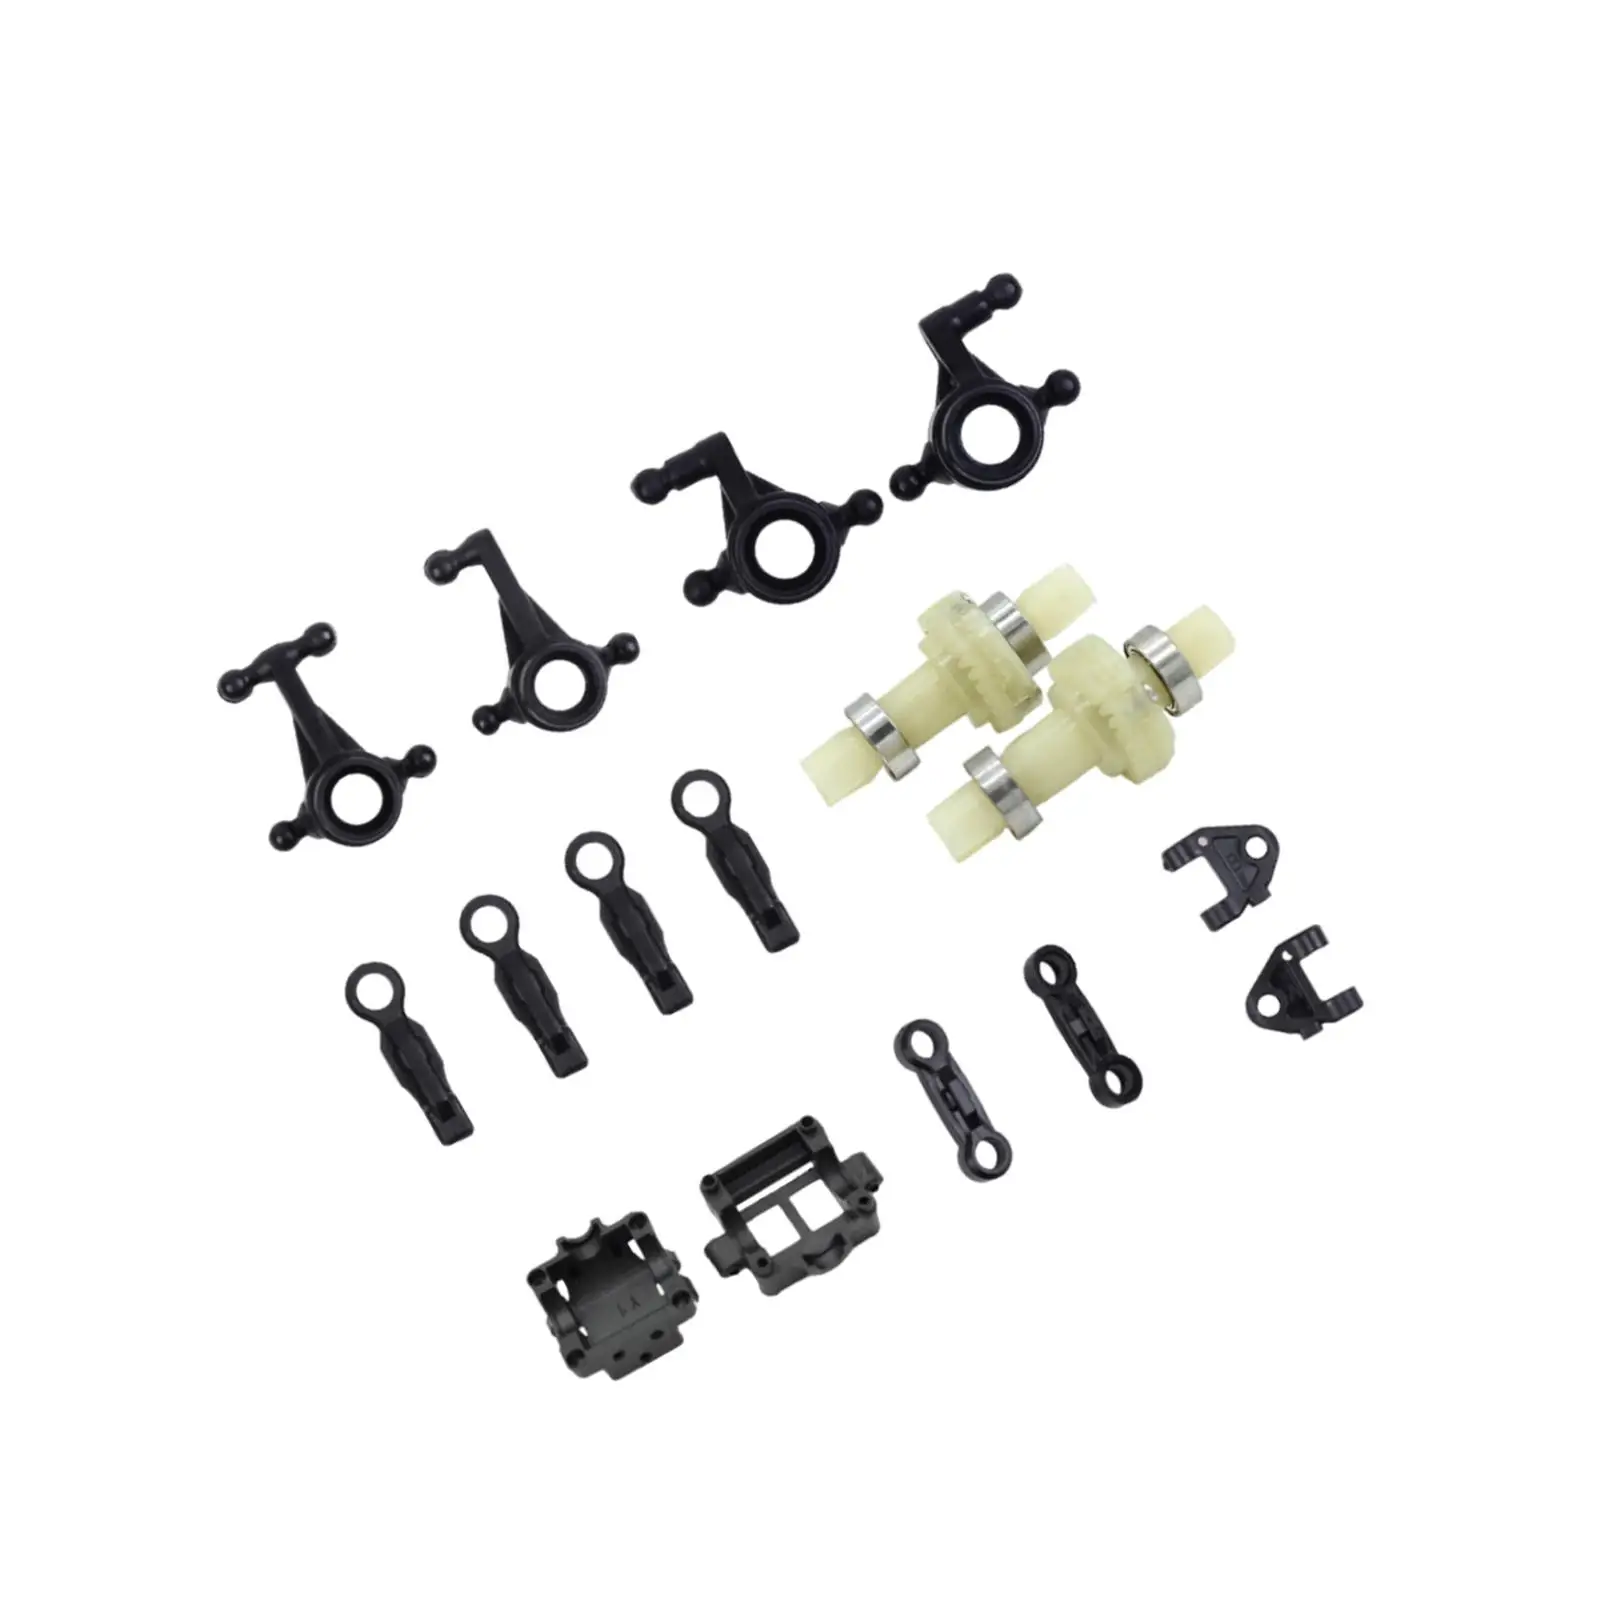 RC Metal Complete Kit Gear Case Upper and Lower Arm for Wltoys 284010 284161 RC Hobby Car Crawler Vehicles Replacement Parts